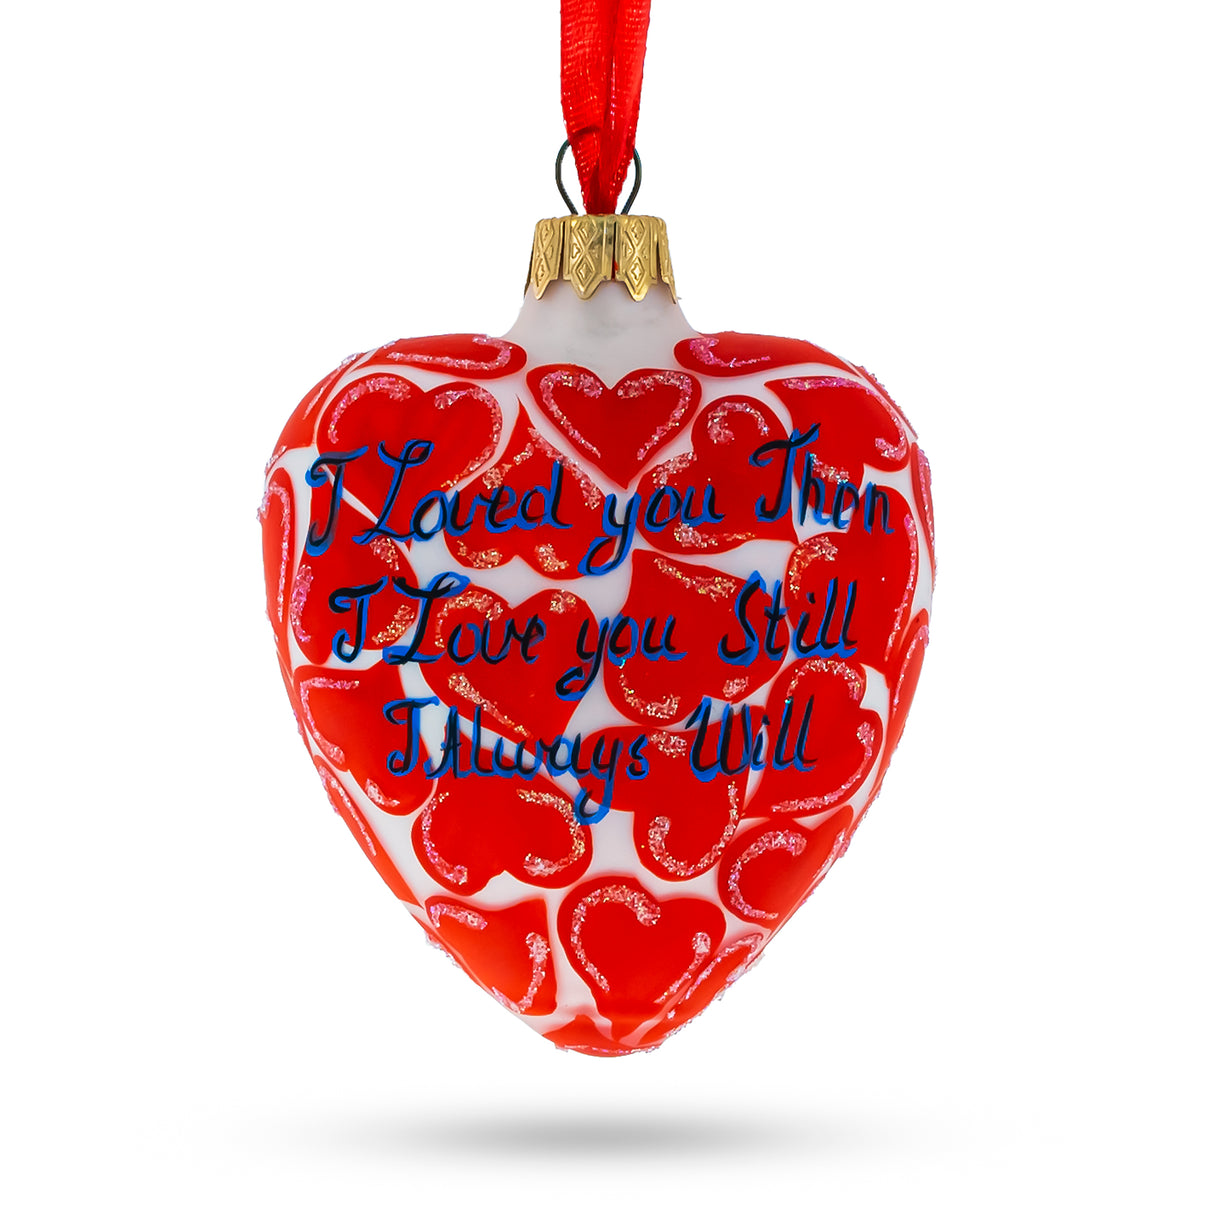 Glass I Love You Glass Heart Christmas Ornament in Red color Heart